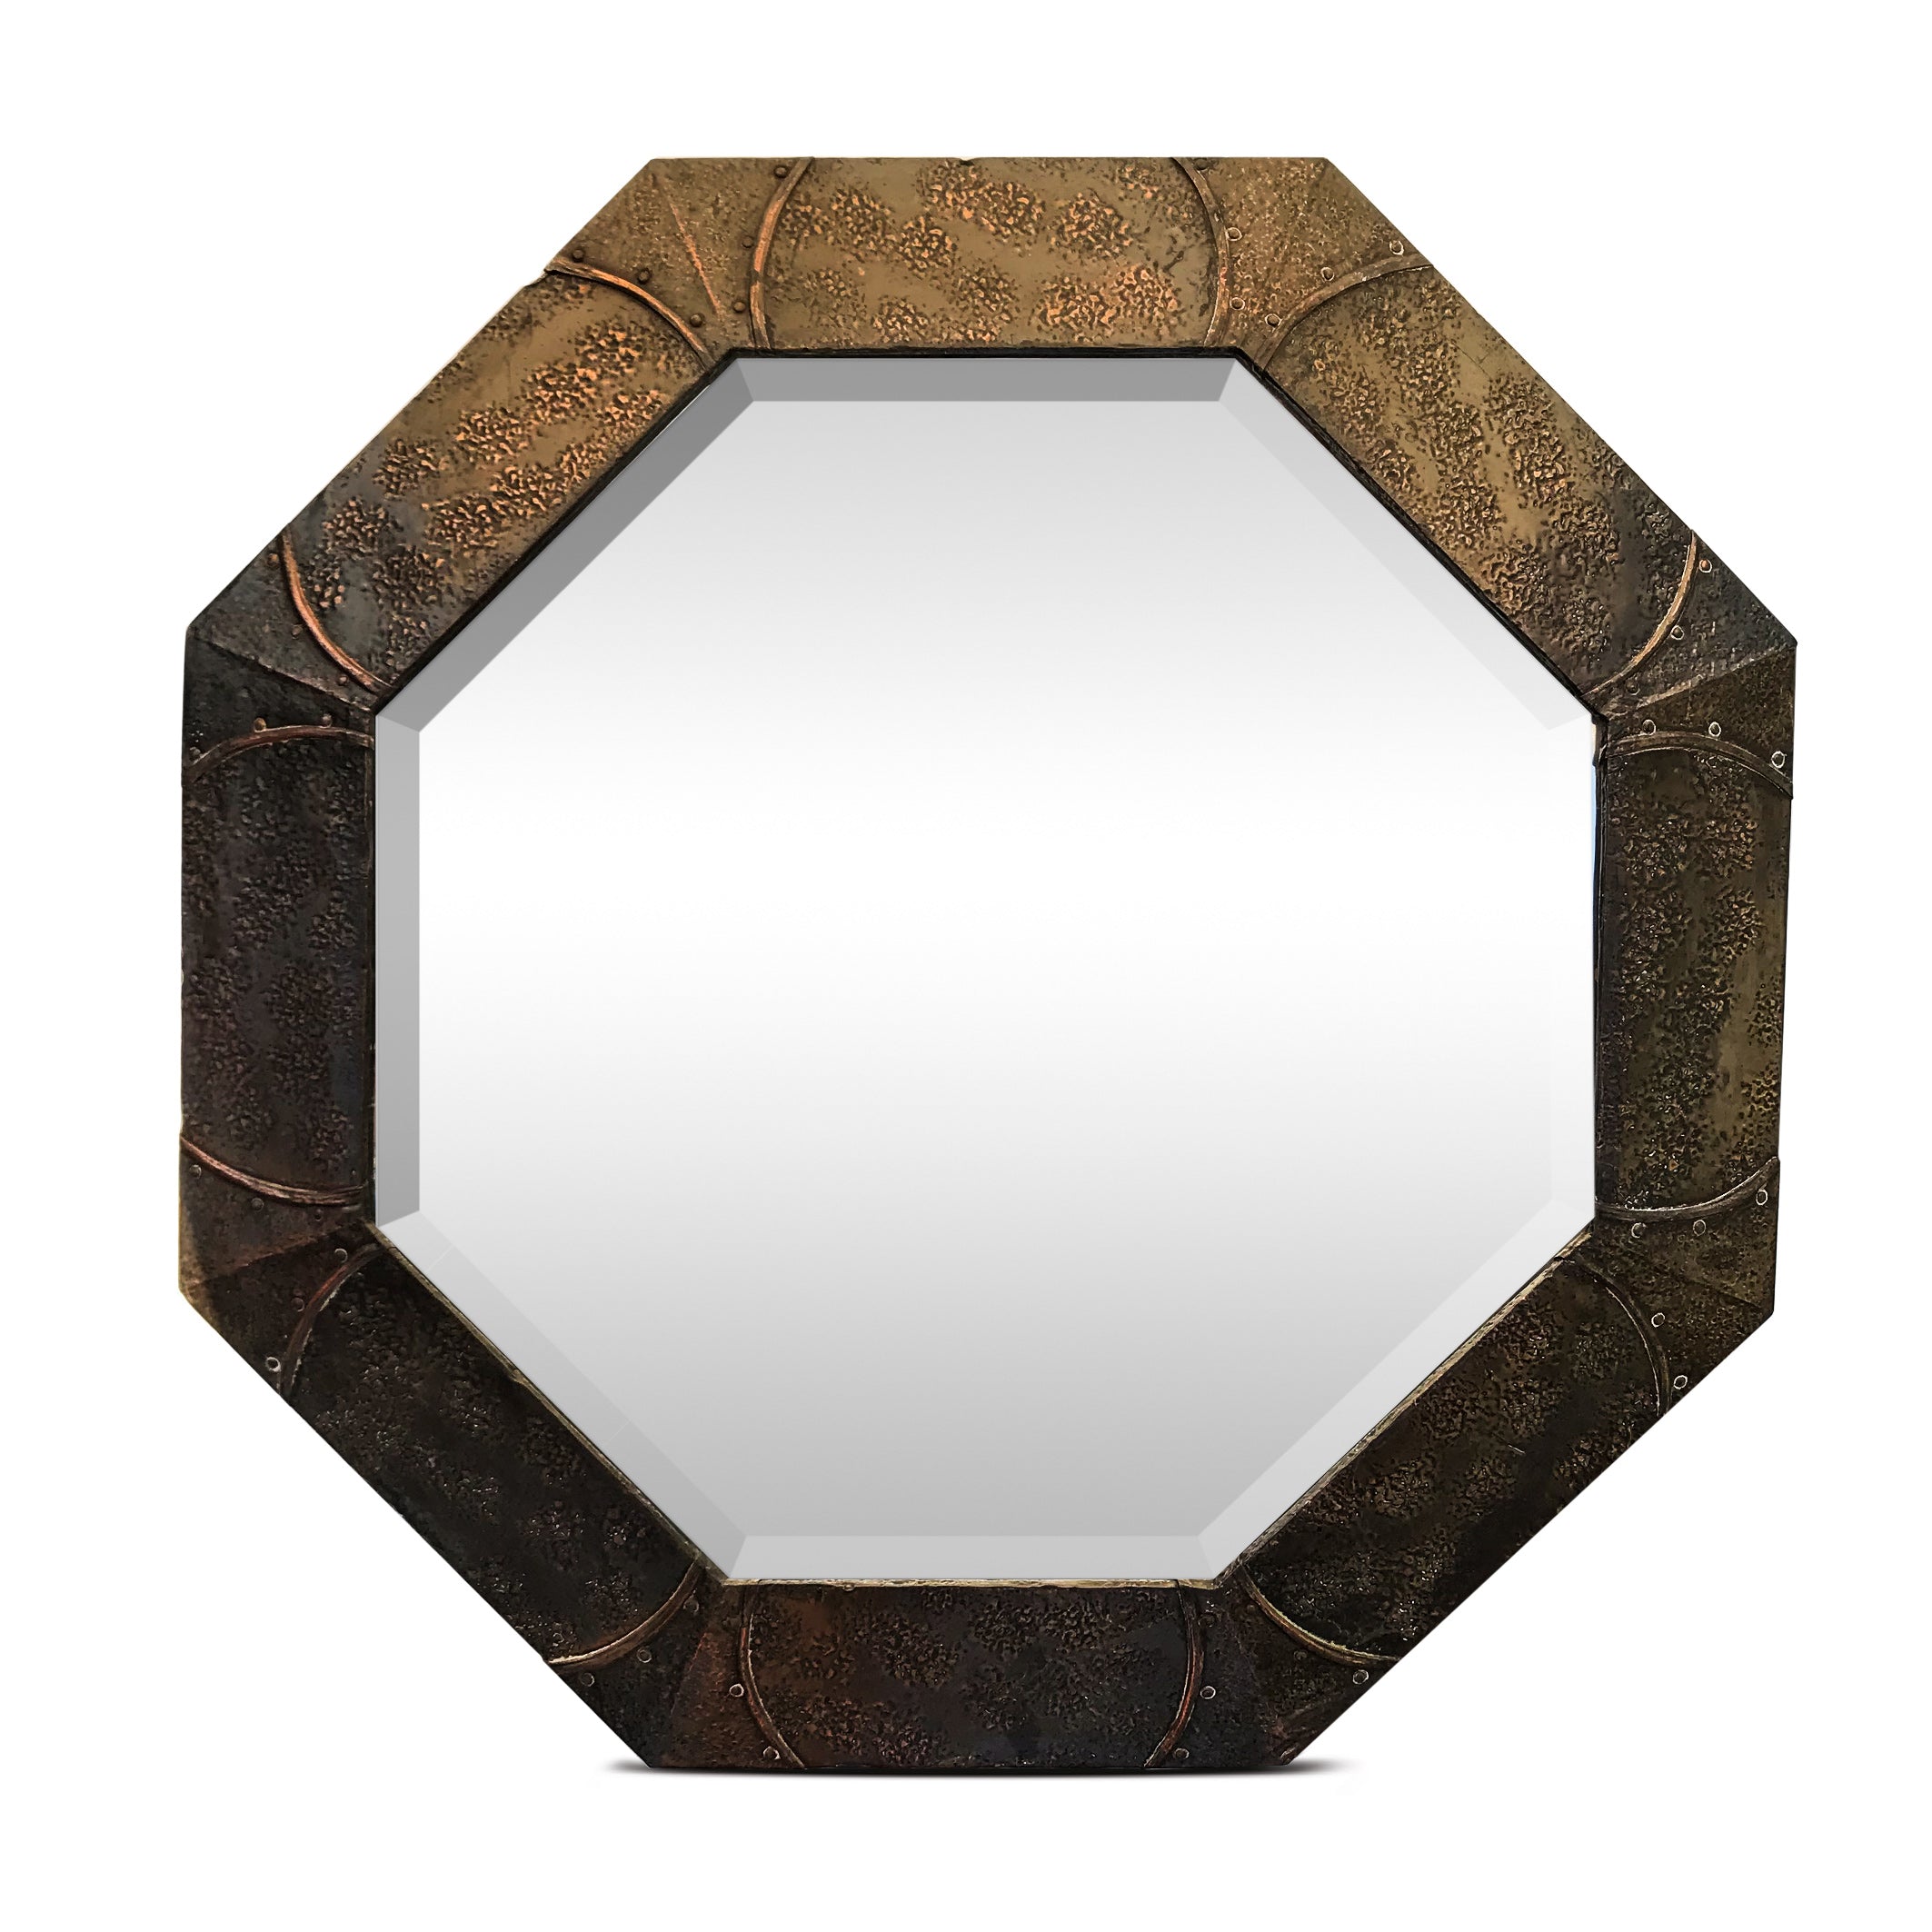 Arts & Crafts Octagonal Copper Mirror. Find this and other Beautiful Vintage items for you home at Intovintage.co.uk.